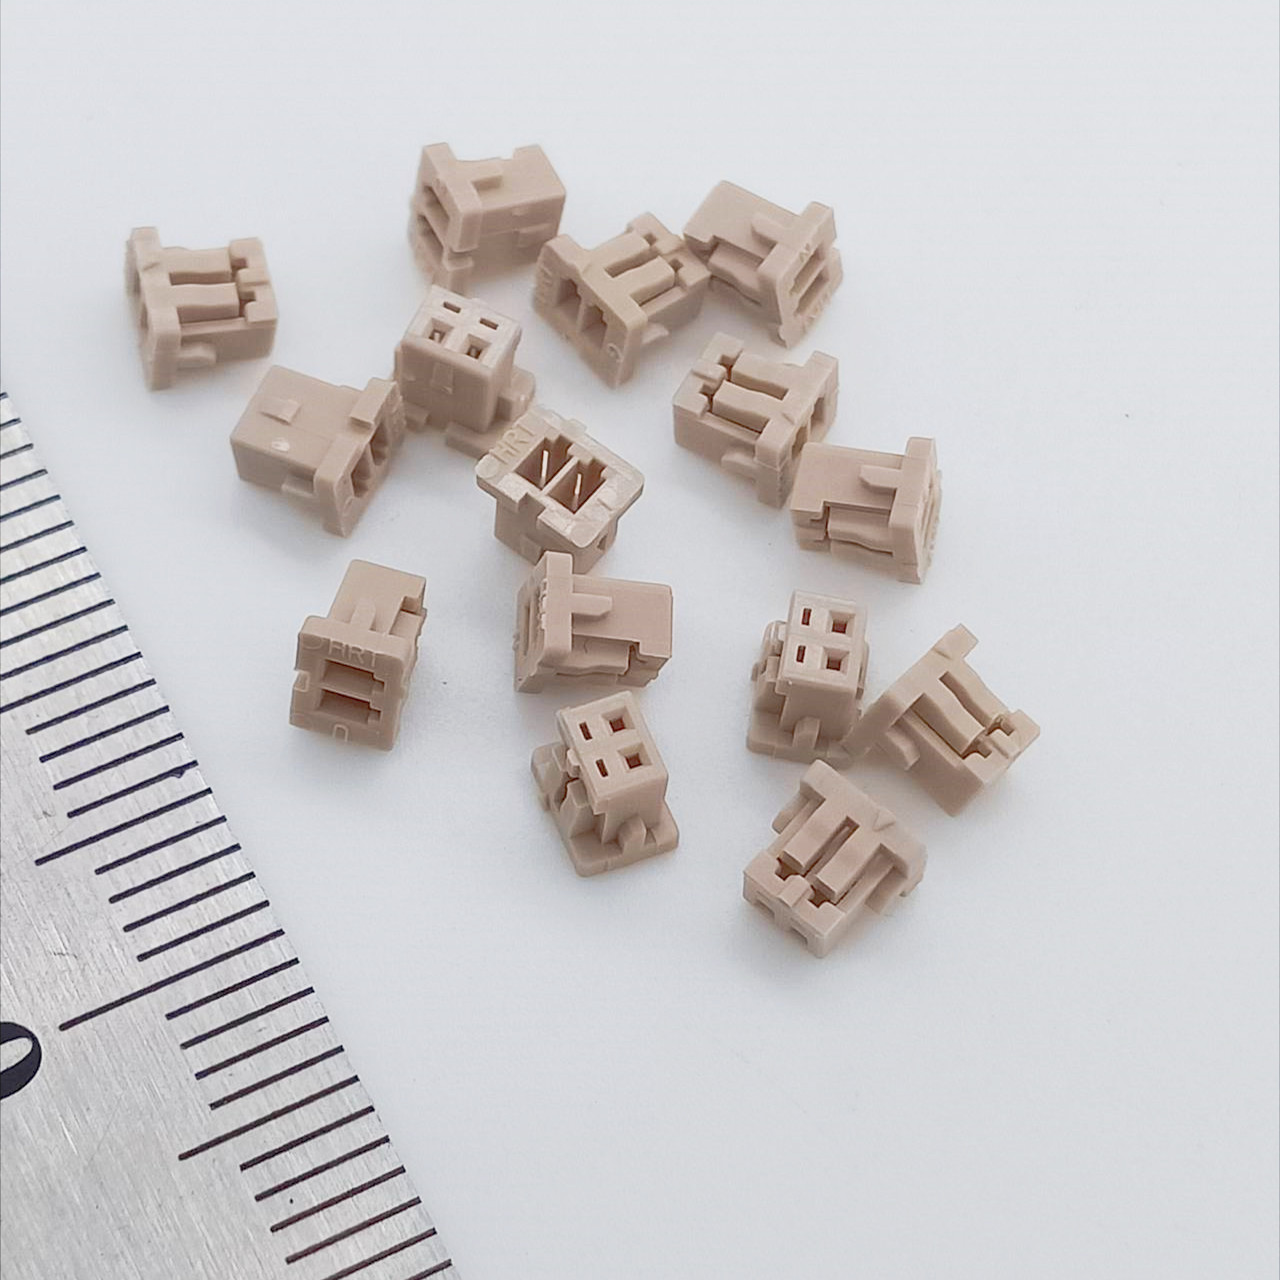 DF13-2S-1.25C is a 2-pin connector with a 1.25mm pitch, commonly used in electronics for compact and dependable connections. It facilitates efficient transmission of data and power in a wide range of applications. 